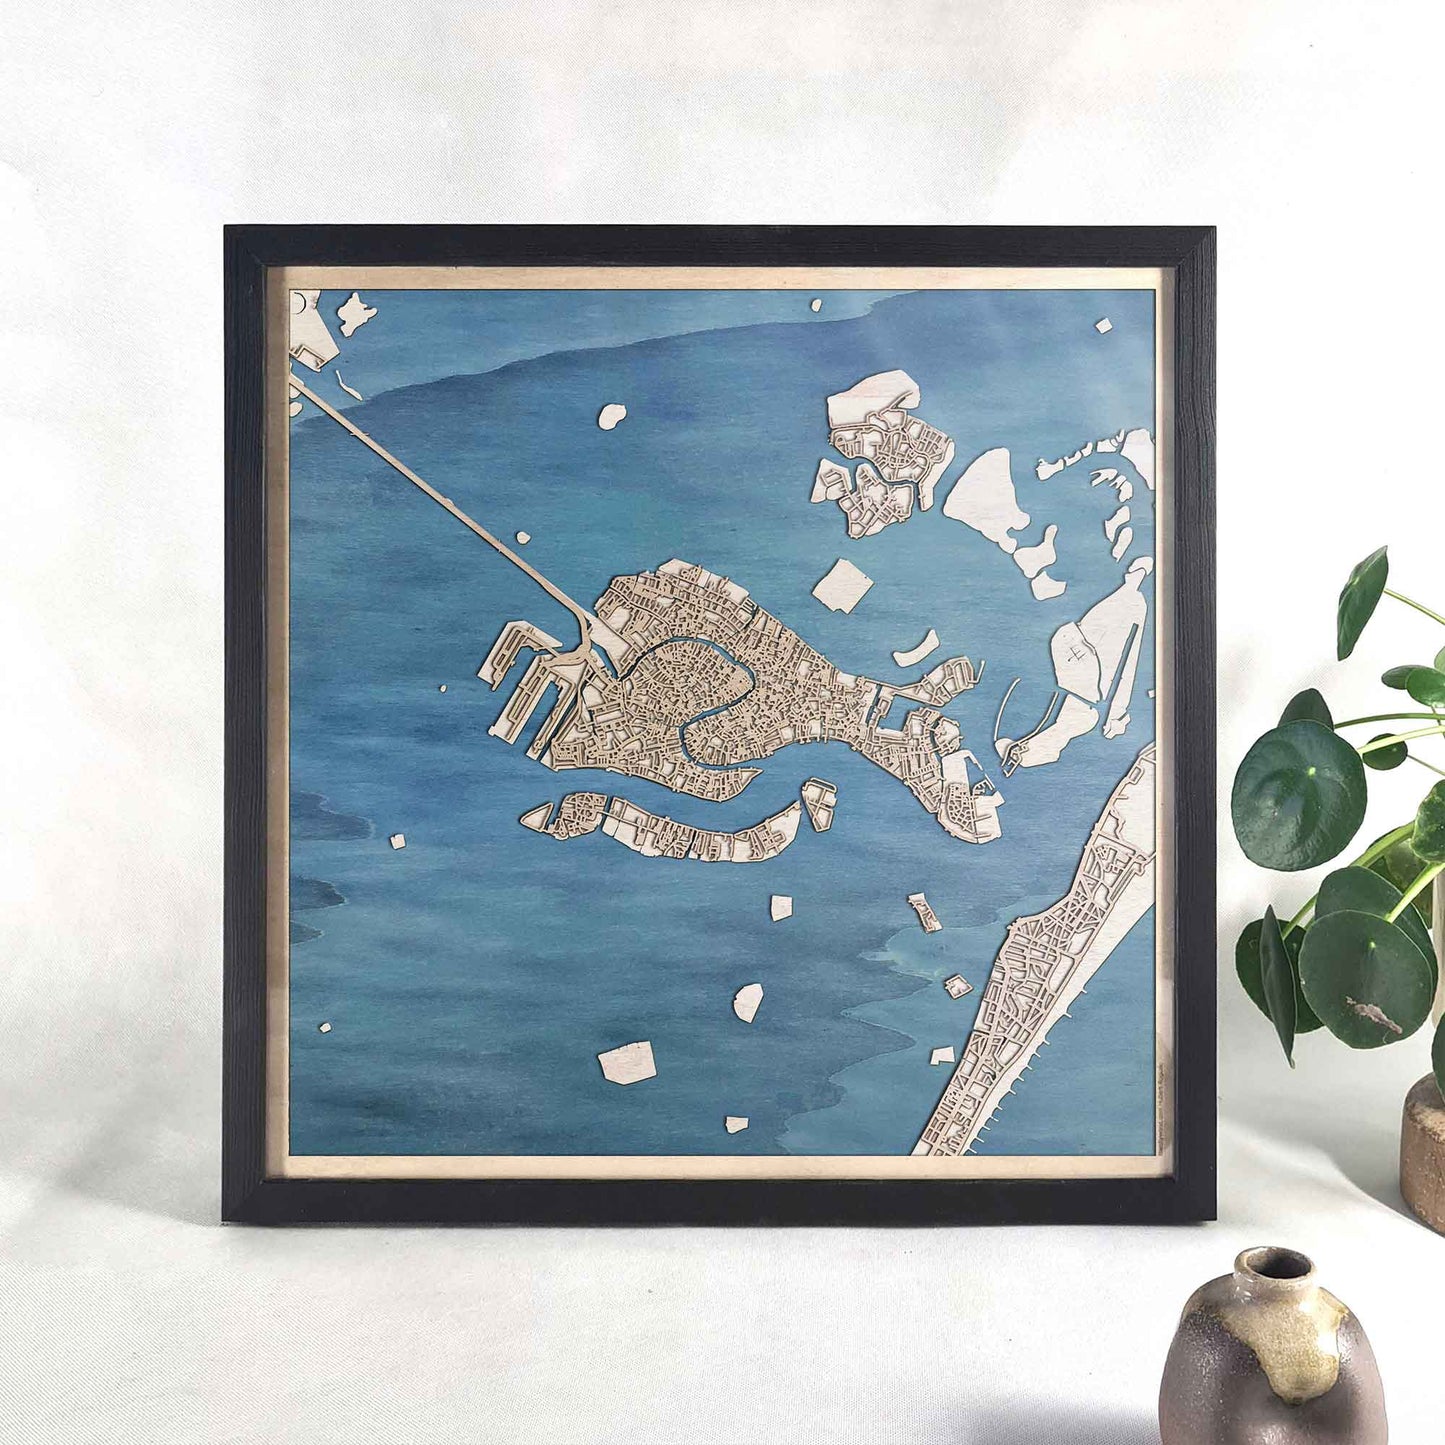 Venice Wooden Map by CityWood - Custom Wood Map Art - Unique Laser Cut Engraved - Anniversary Gift